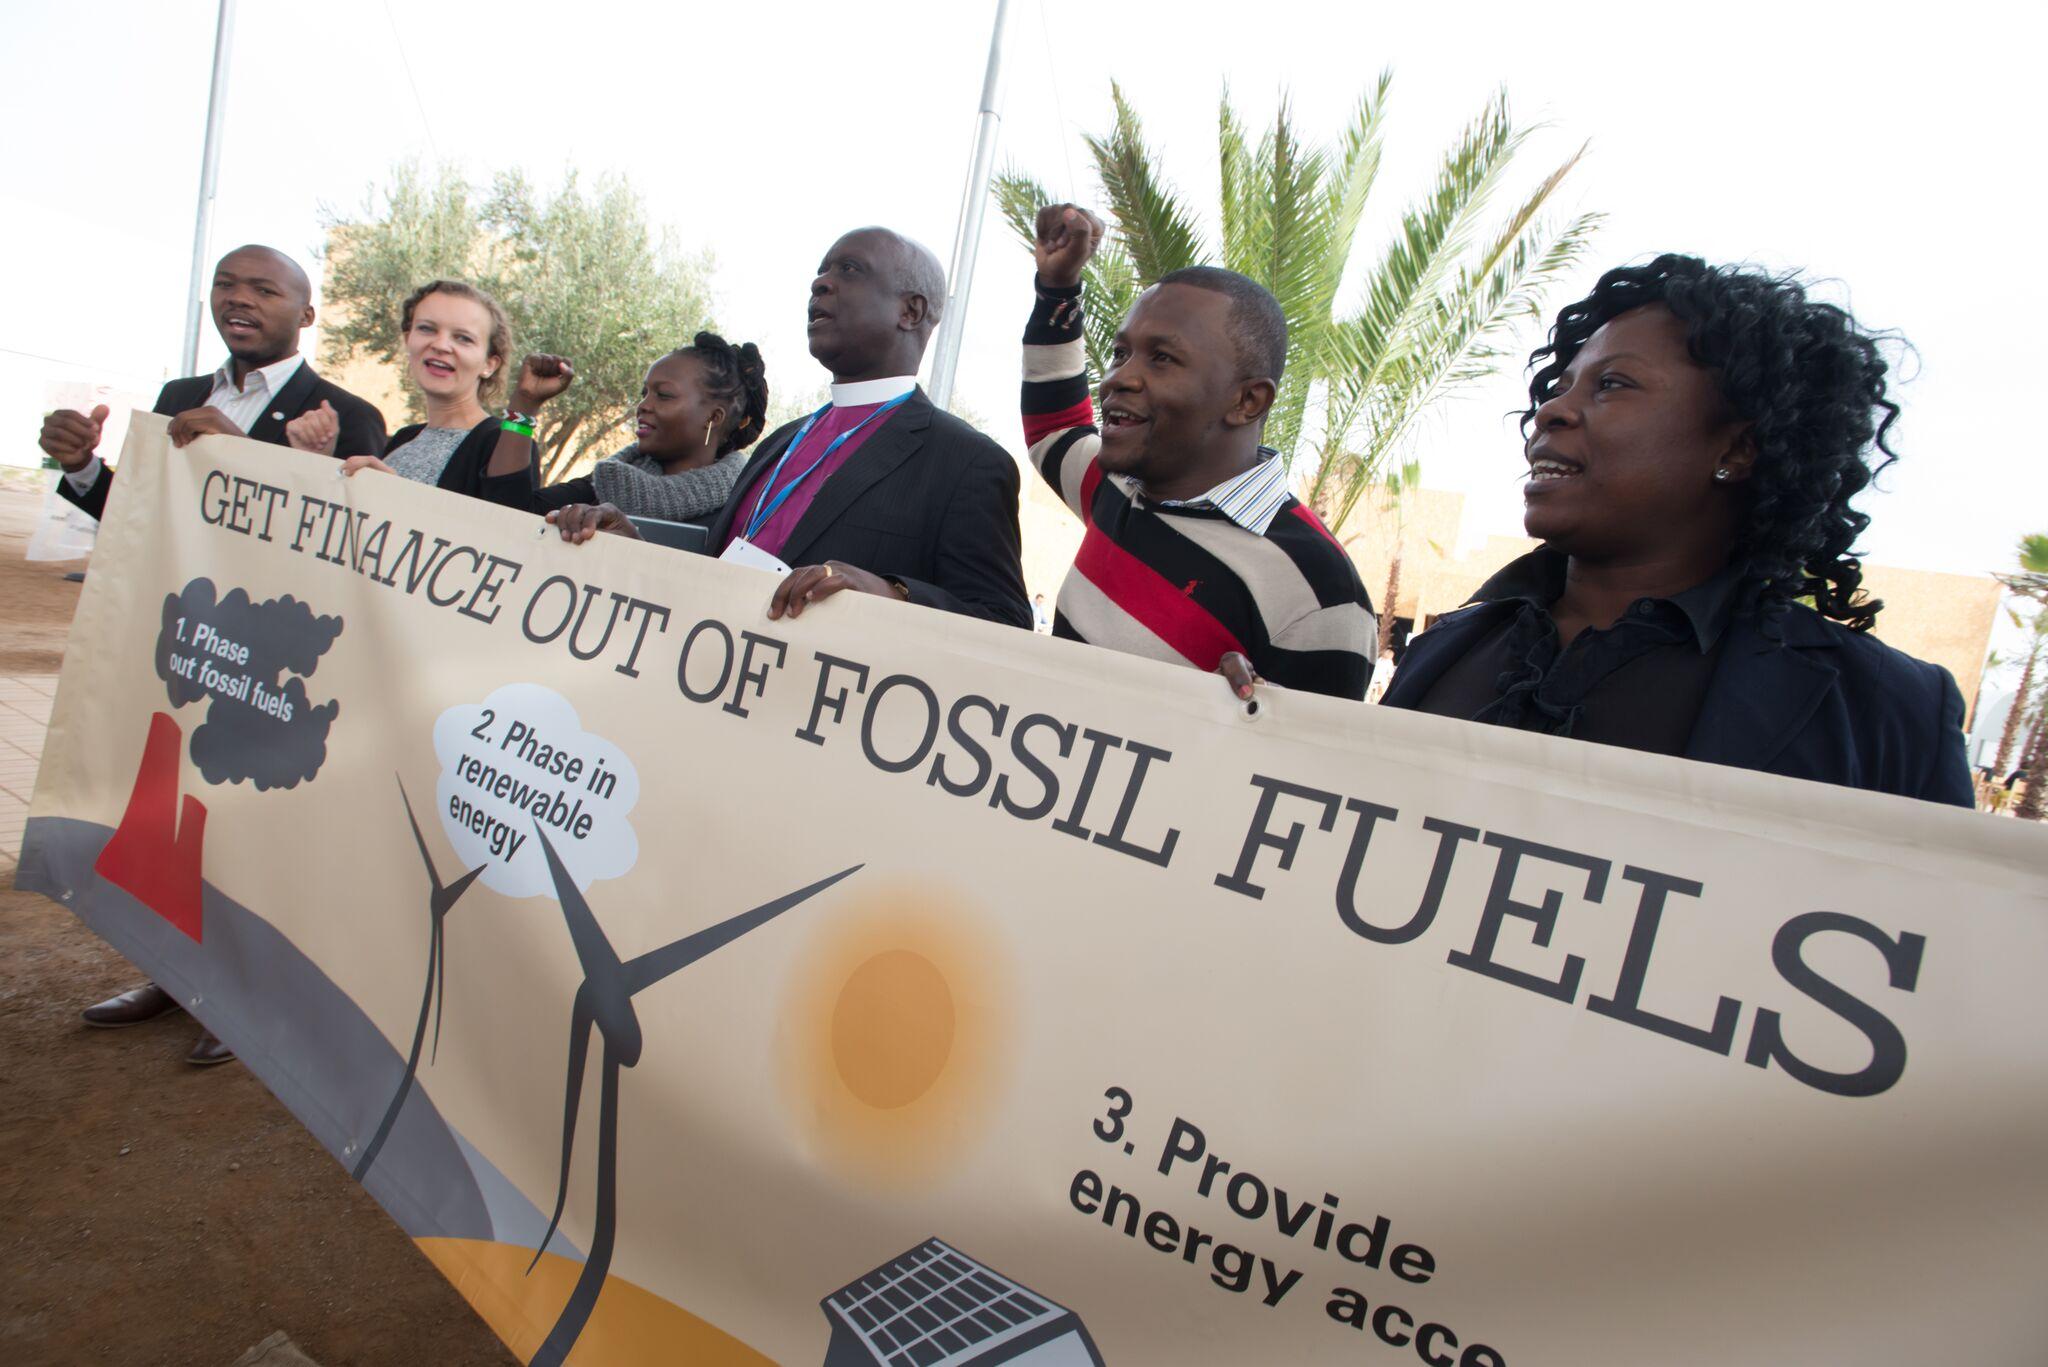 Campaign stunt symbolizing divestment from fossil fuels and support of renewable energies at COP 22 in Marrakech, Morocco in December 2016.  Photo by LWF/Ryan Roderick Beiler